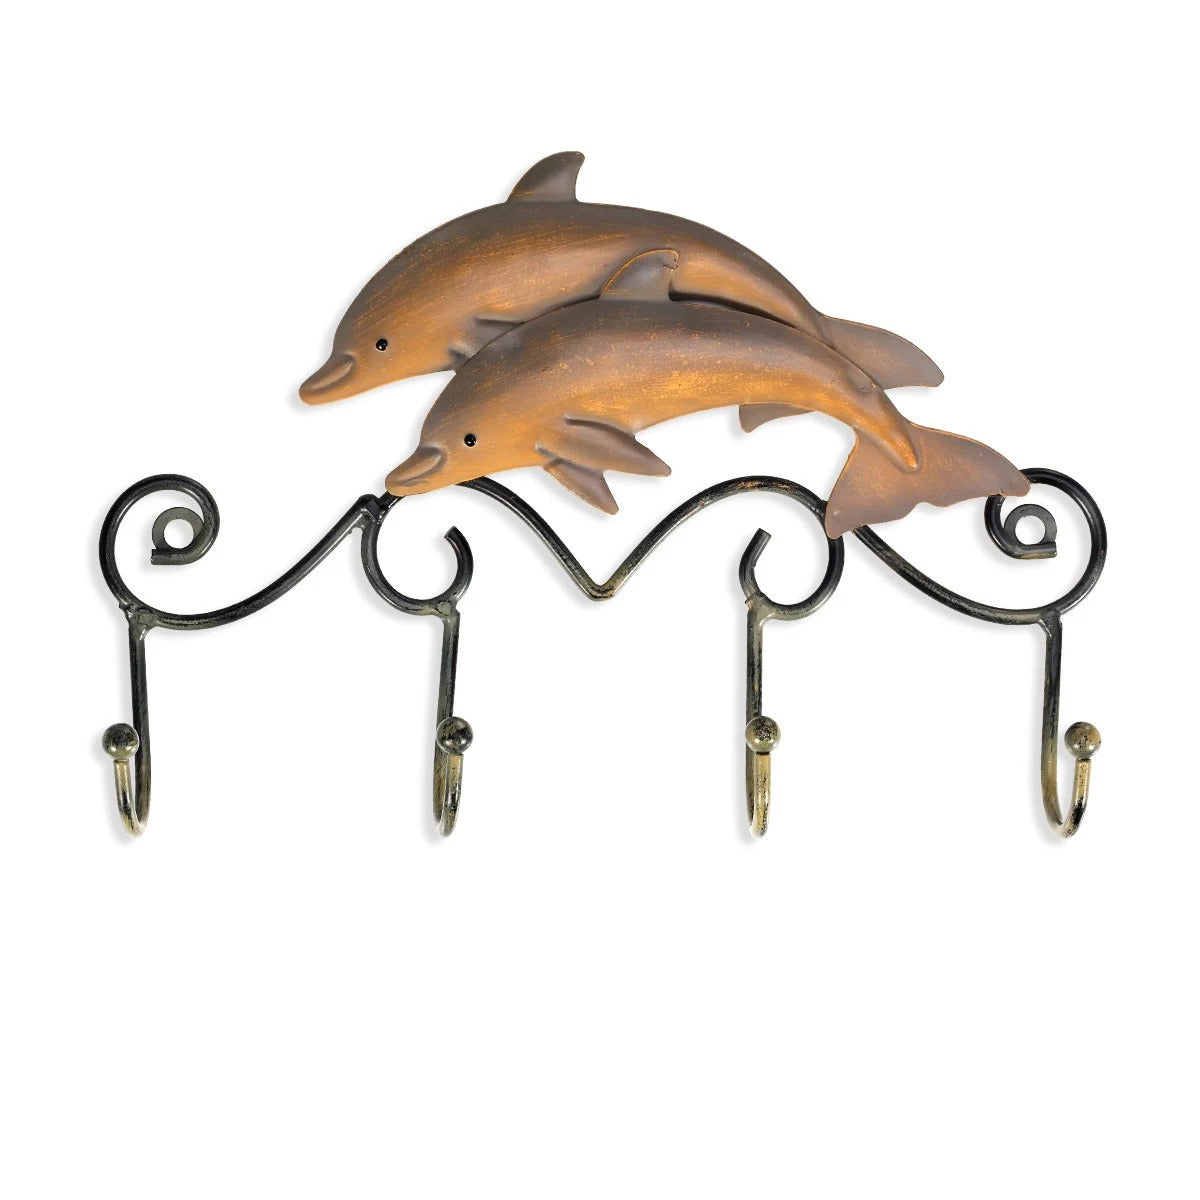 The best and cutest animal wall hooks ever!